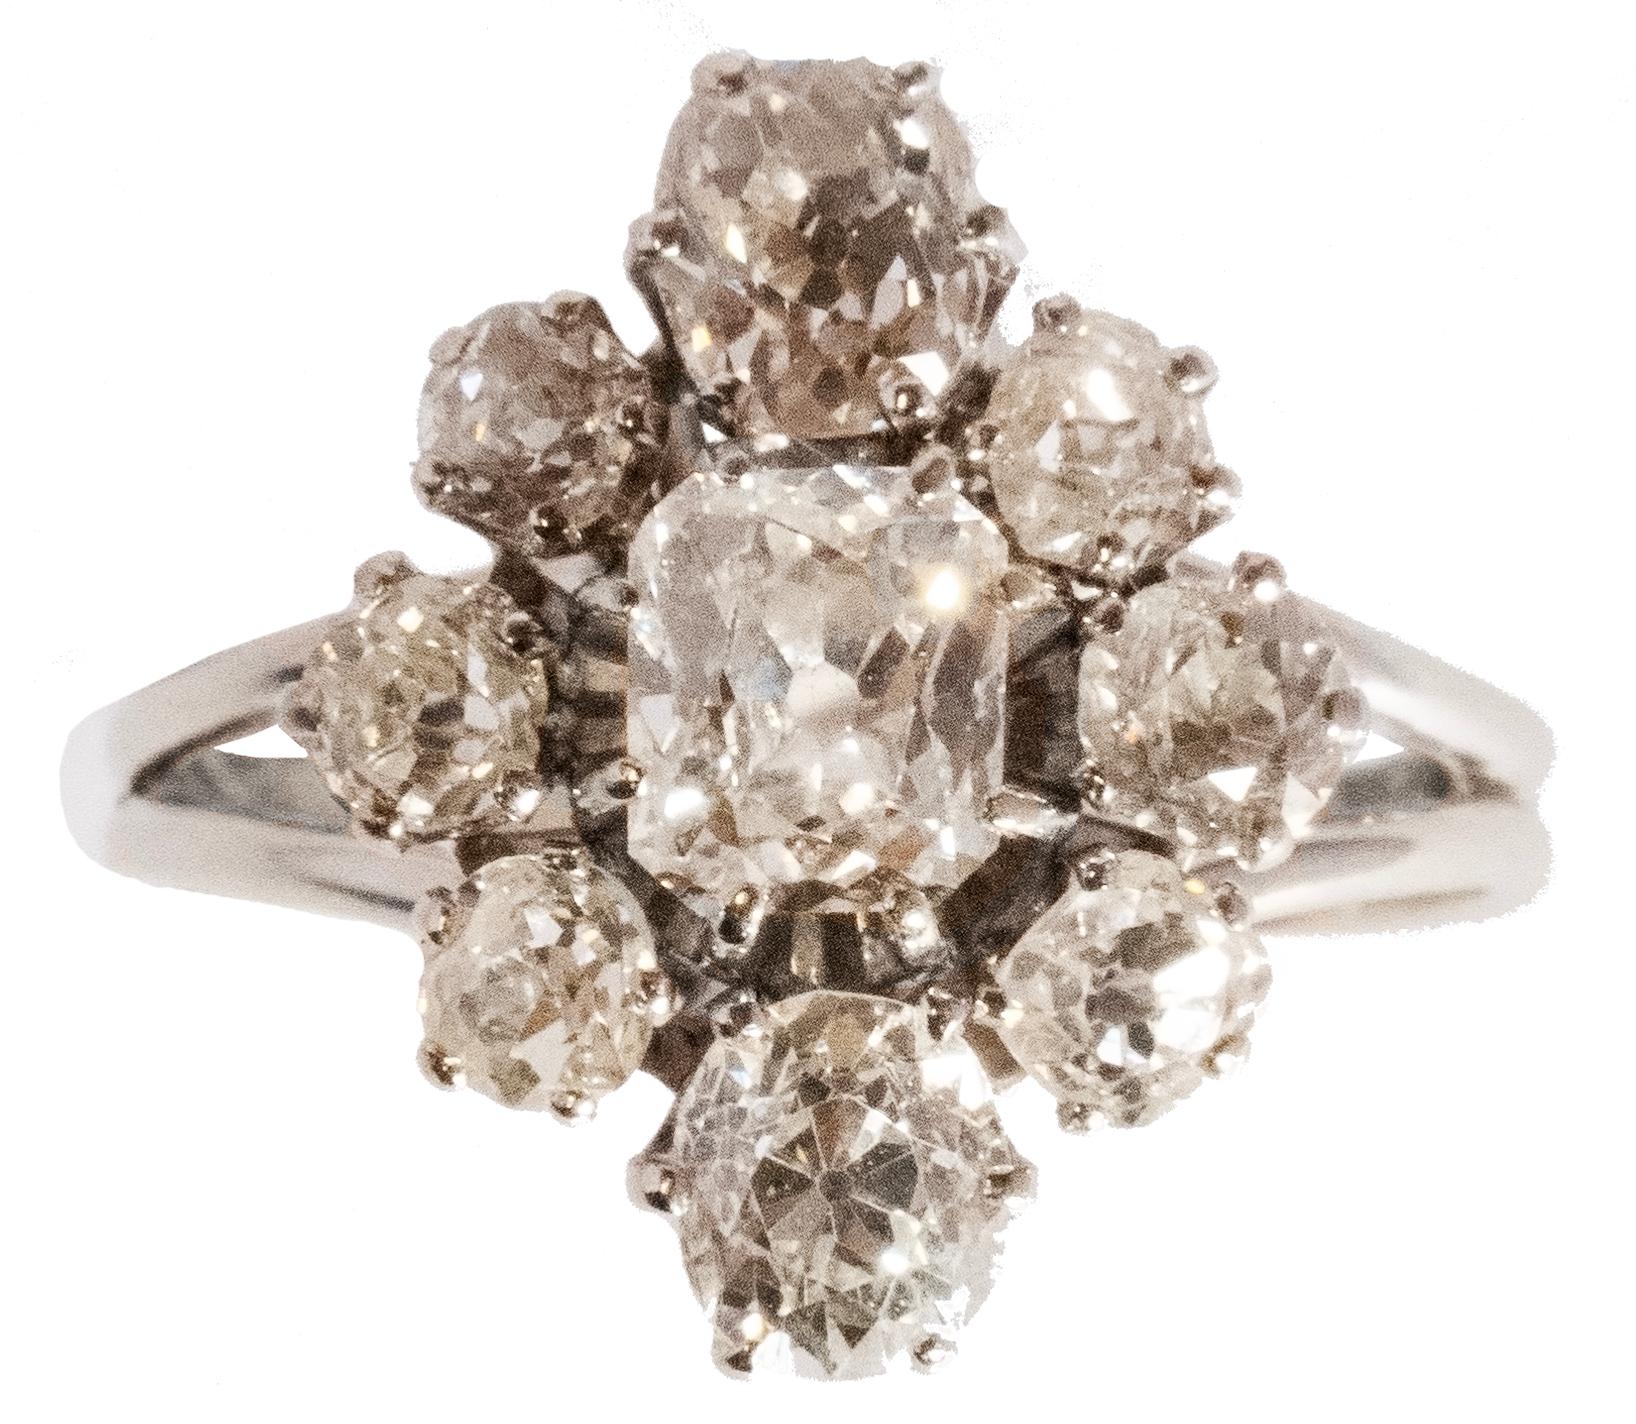 This exquisite statement piece features a 0.75 ct F/VS old cut diamond at its center. Accompanying it are two oval old cut diamonds totaling 1.10ct H/VS and six additional oval old cut diamonds, totaling 1.10ct H-K/SI.

Dating back to the 1960s in